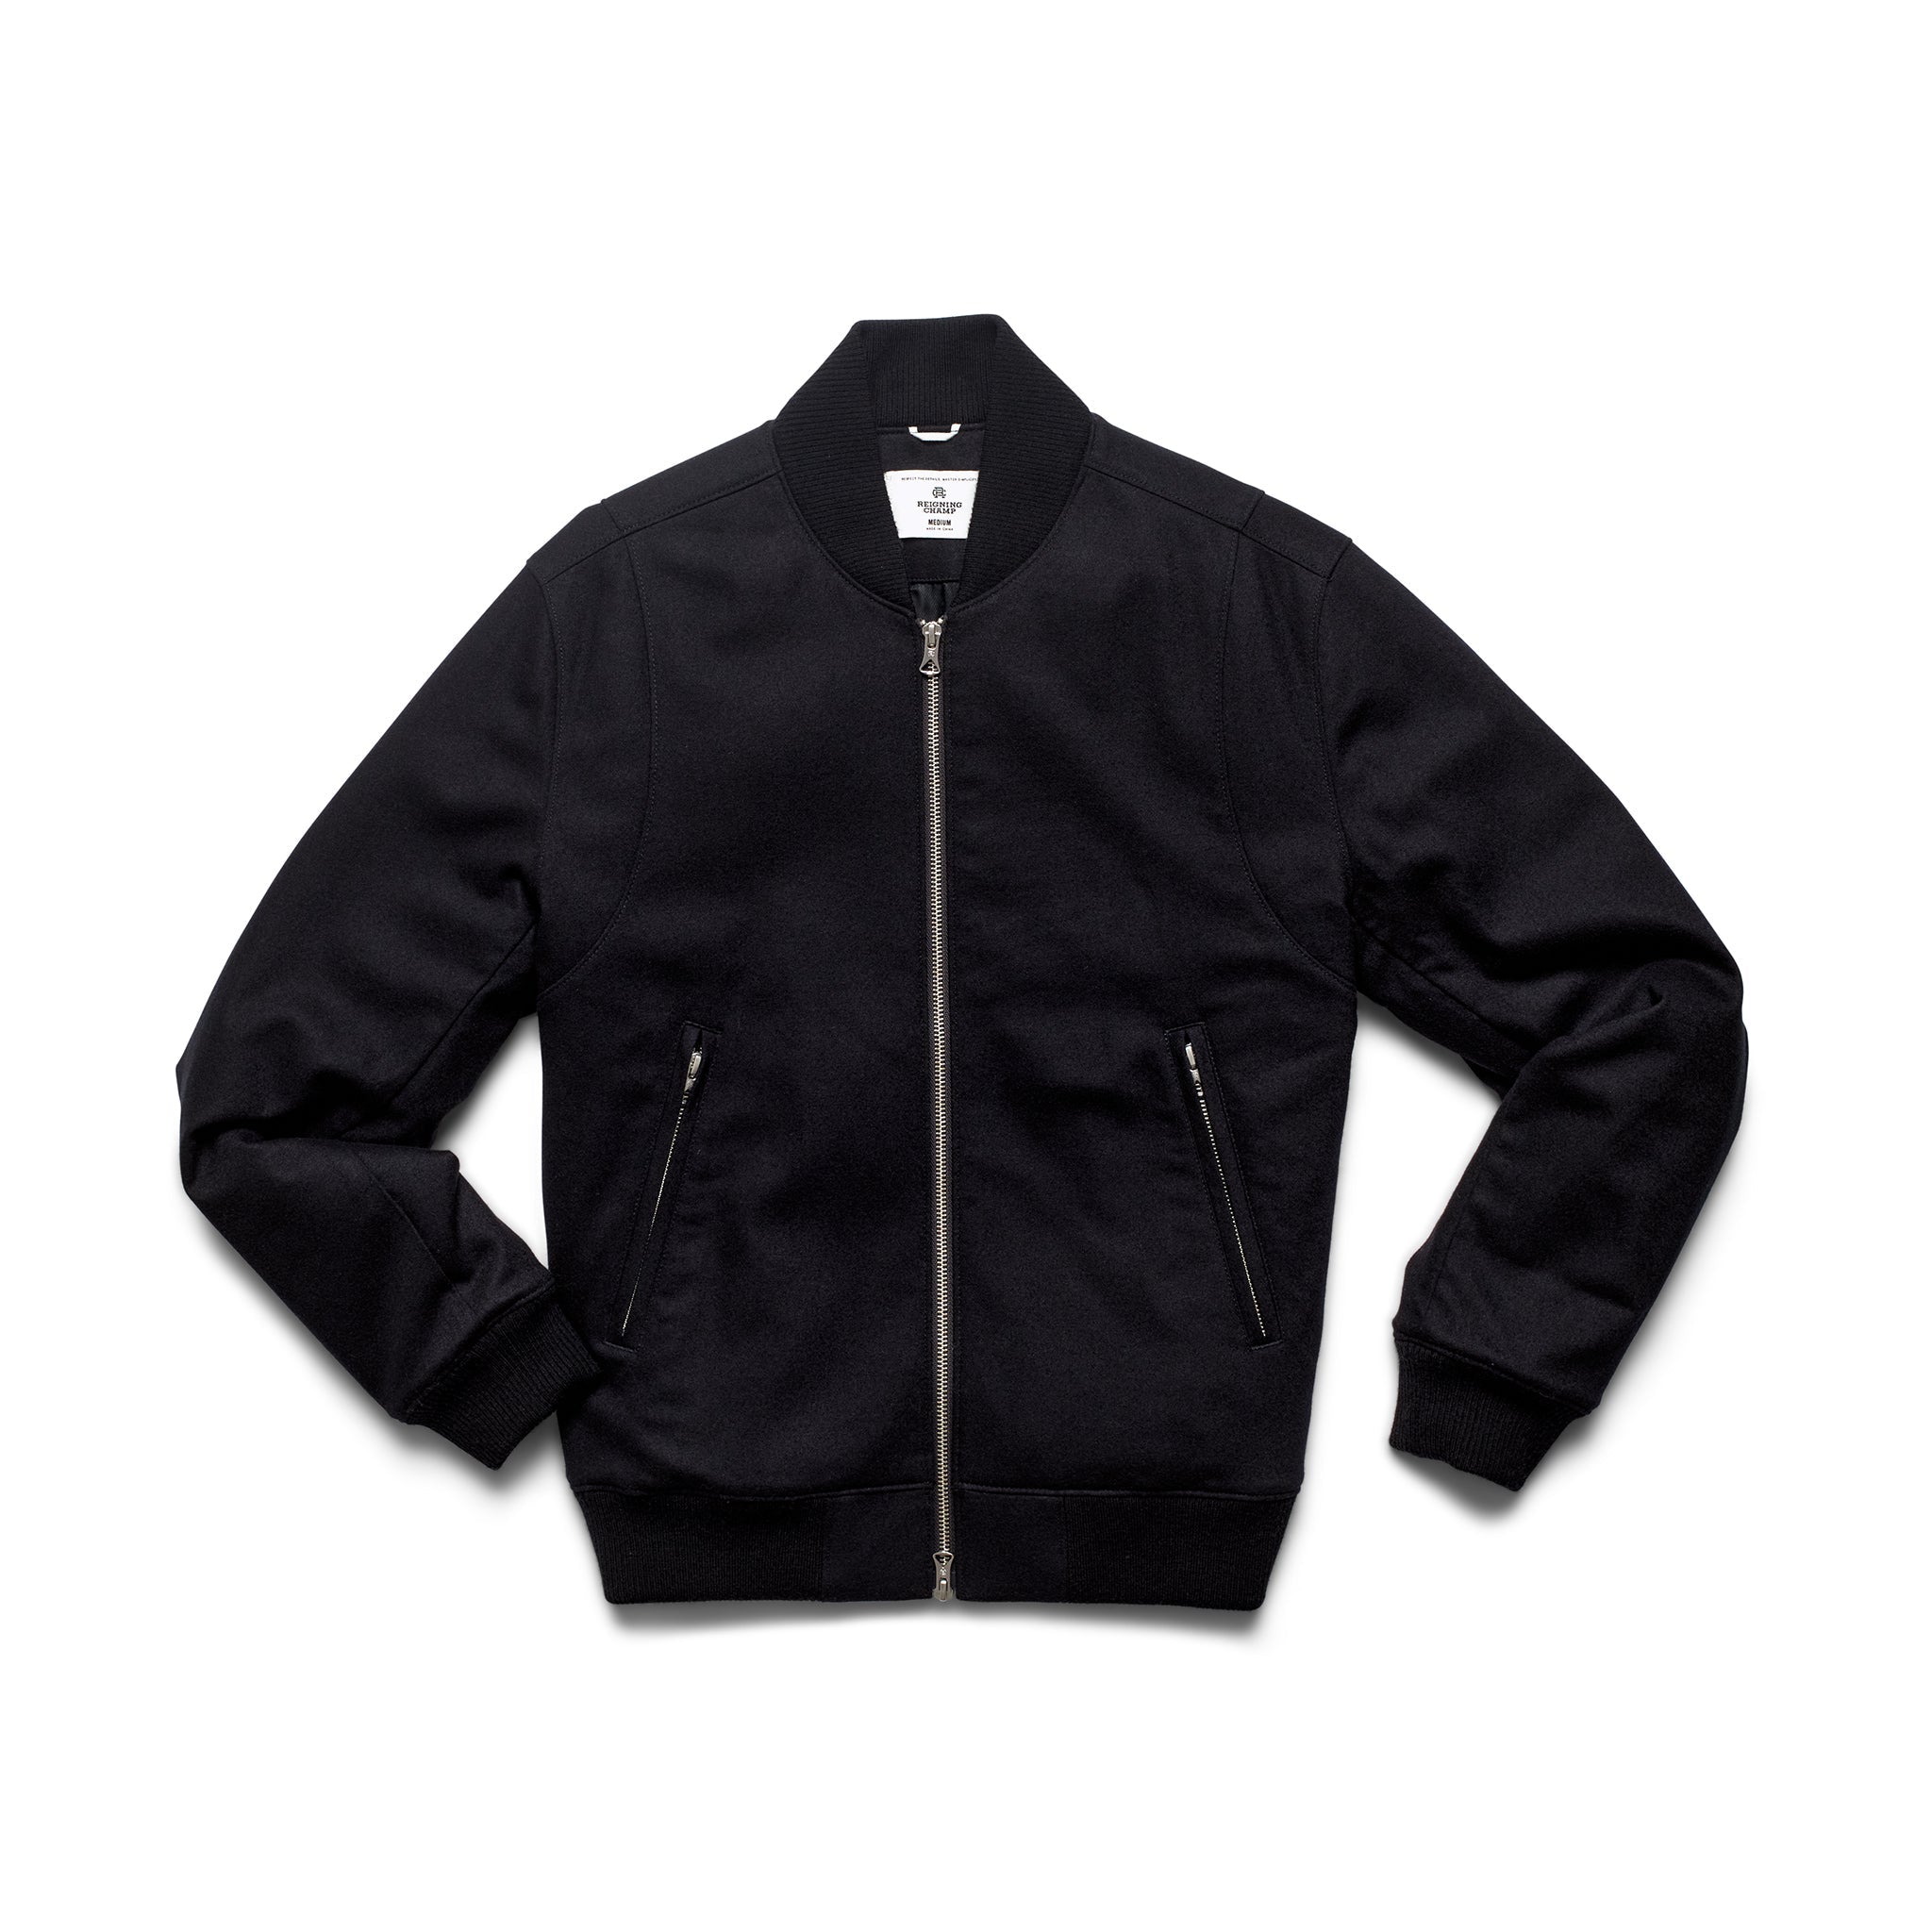 Wool Flannel JV Jacket | Reigning Champ